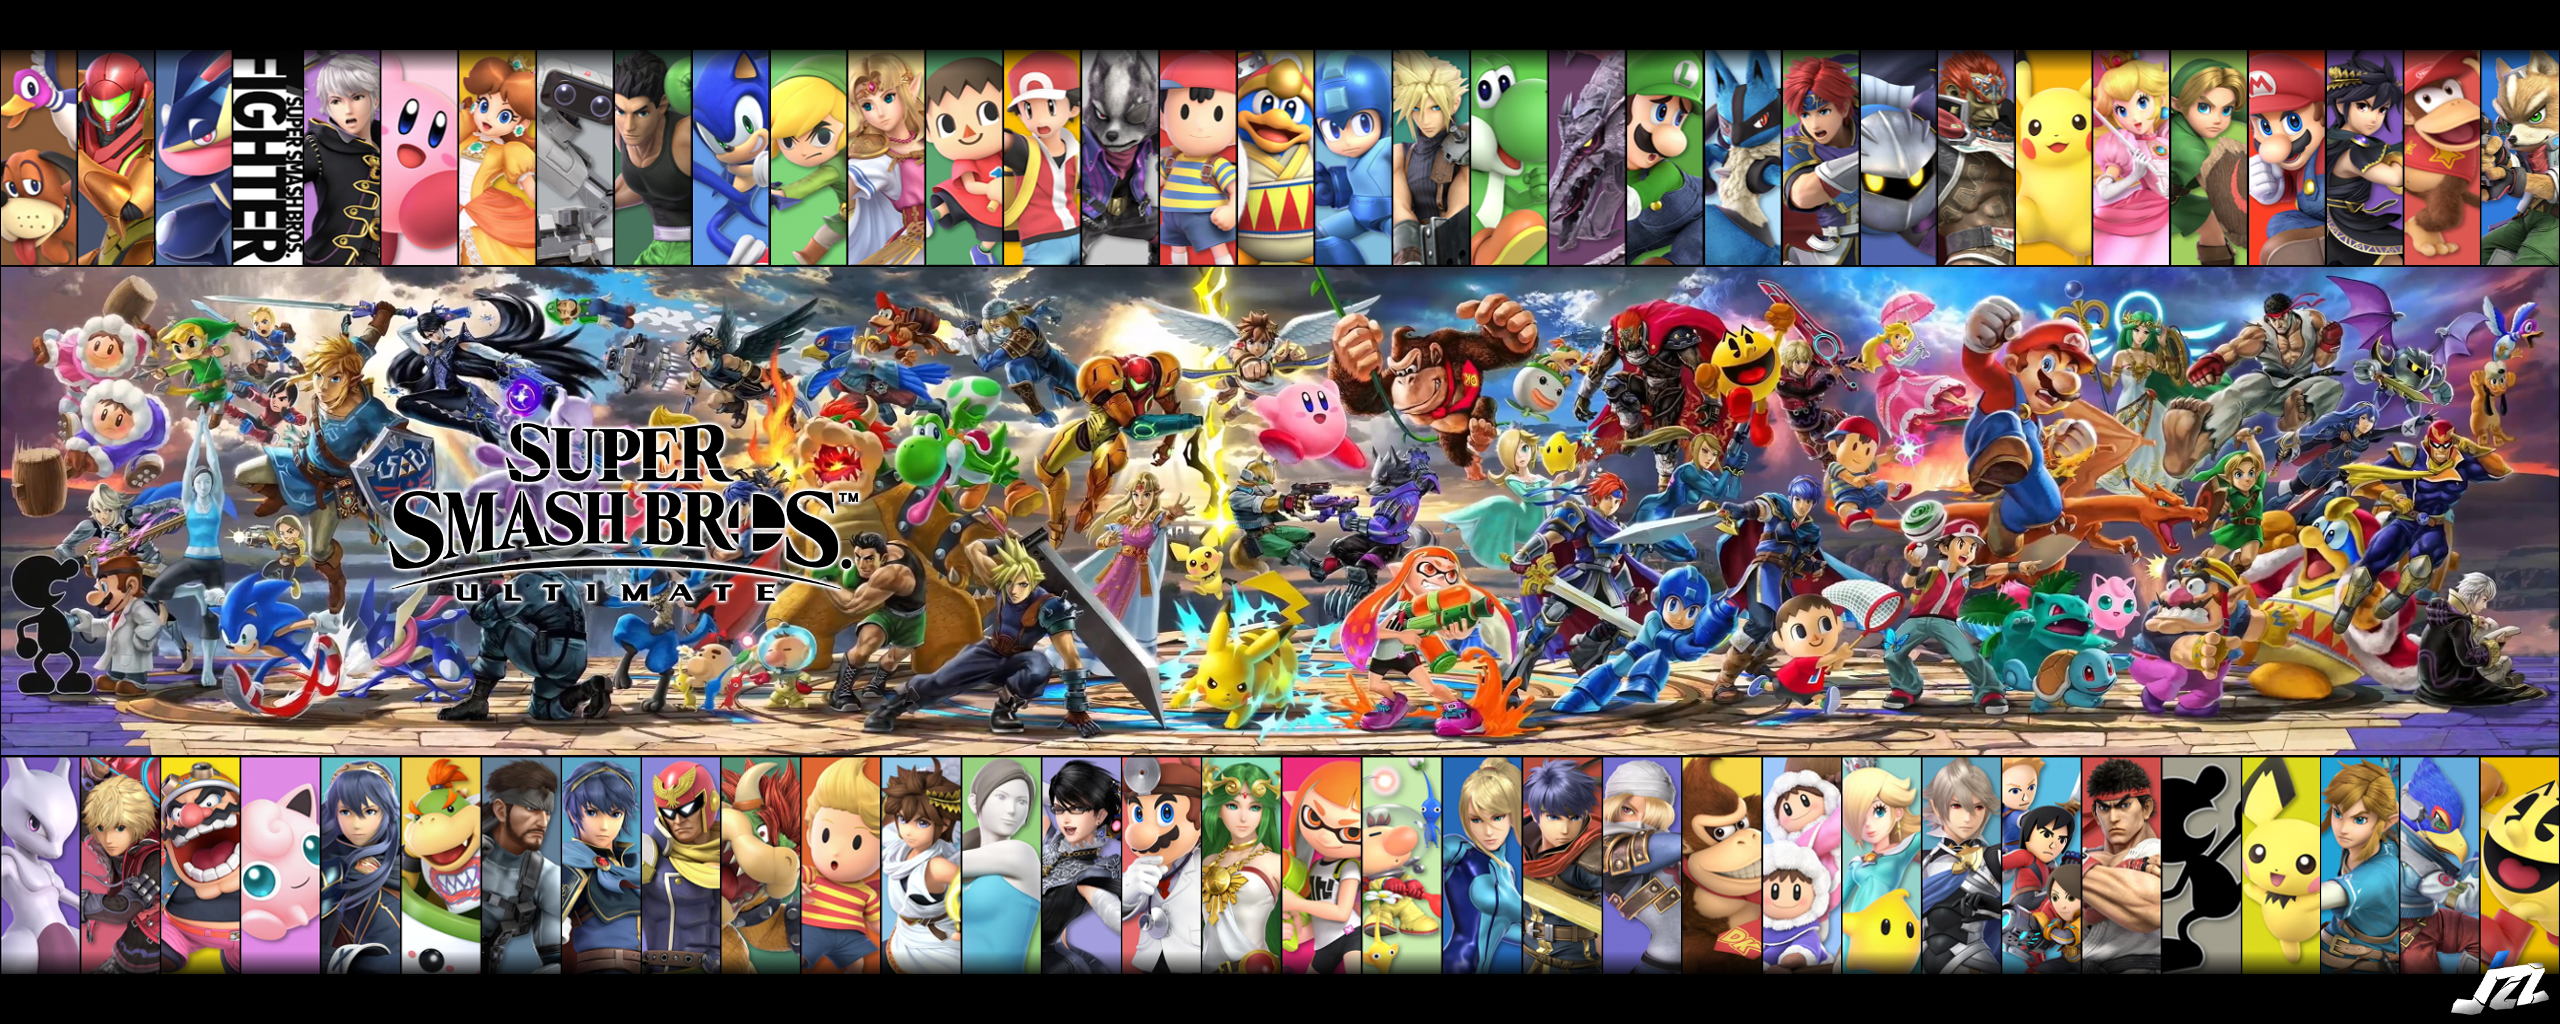 Super Smash Bros Ultimate Dual Monitor Background By